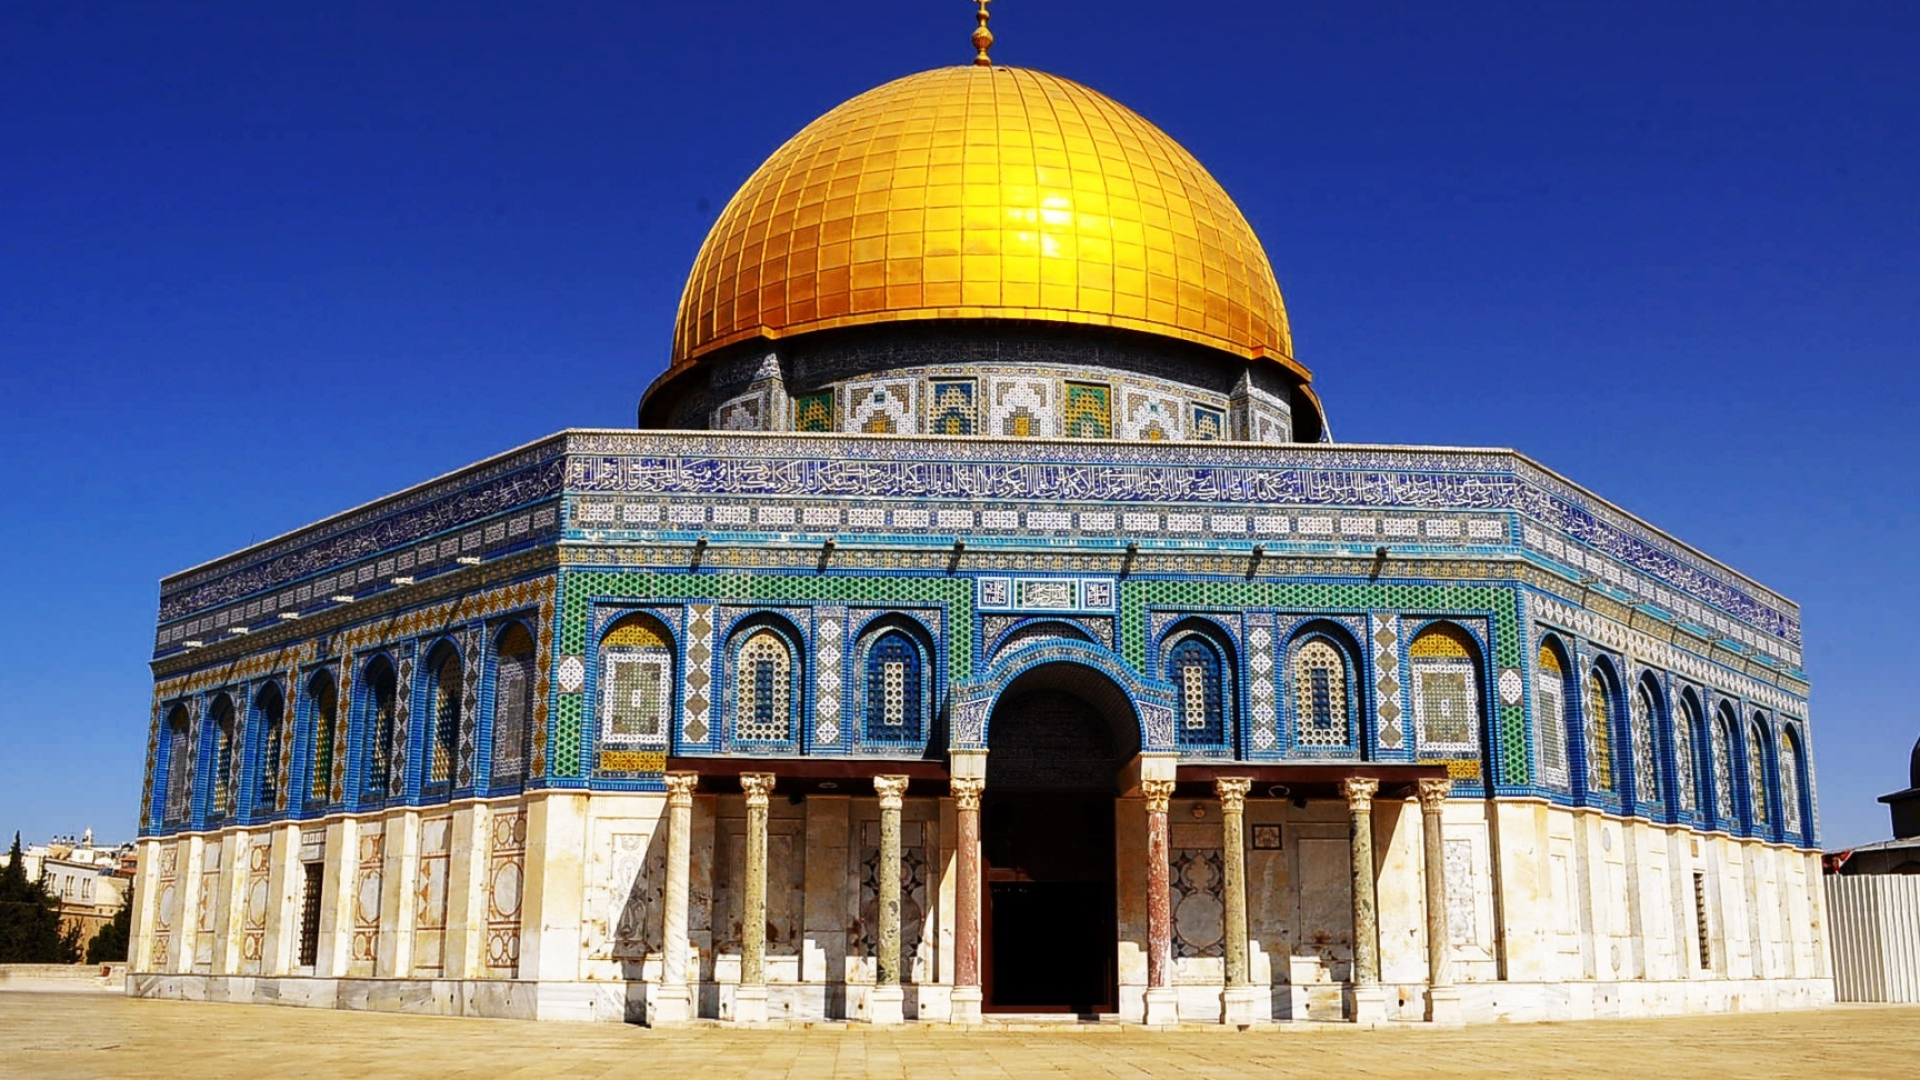 Jerusalem: The Dome of the Rock, Situated in the center of the Temple Mount. 1920x1080 Full HD Wallpaper.